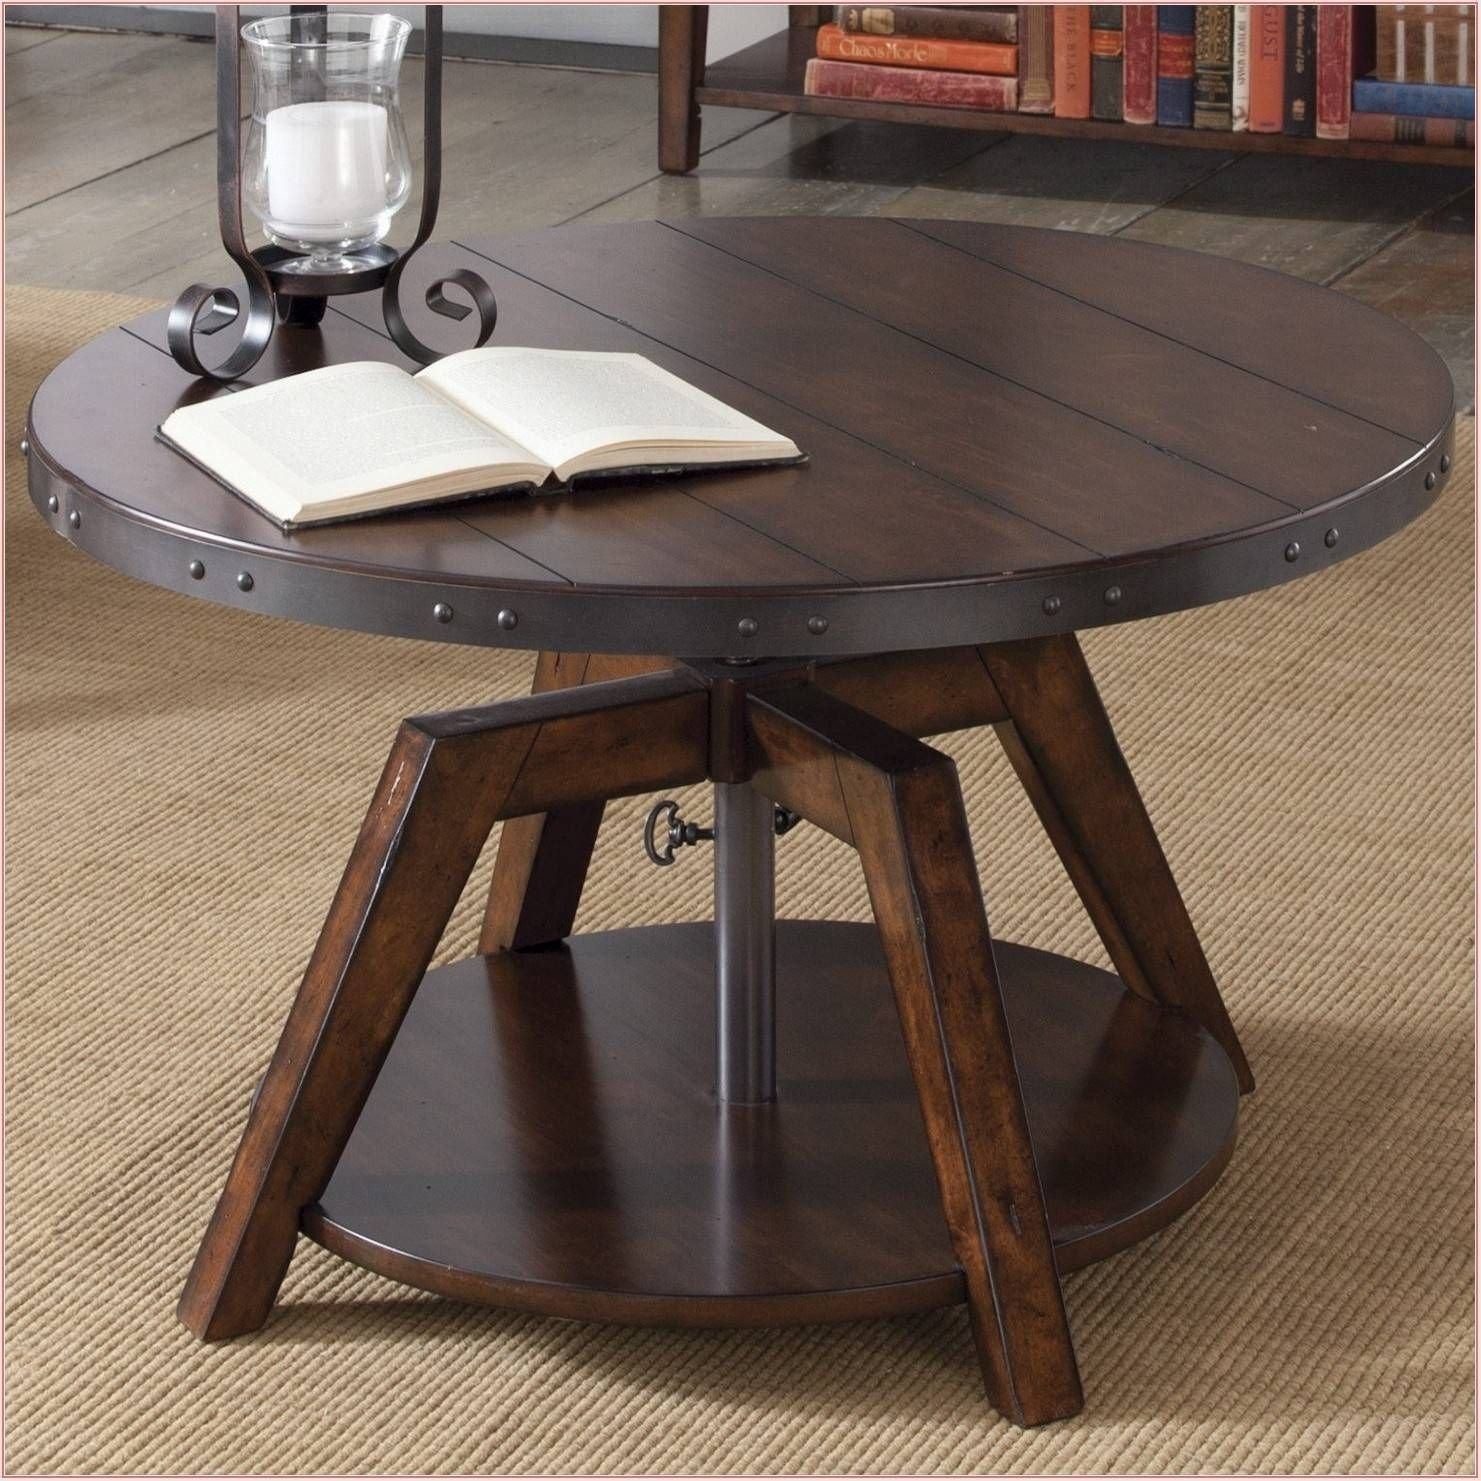 50 Amazing Convertible Coffee Table To Dining Table Up To 70 Off pertaining to measurements 1481 X 1481